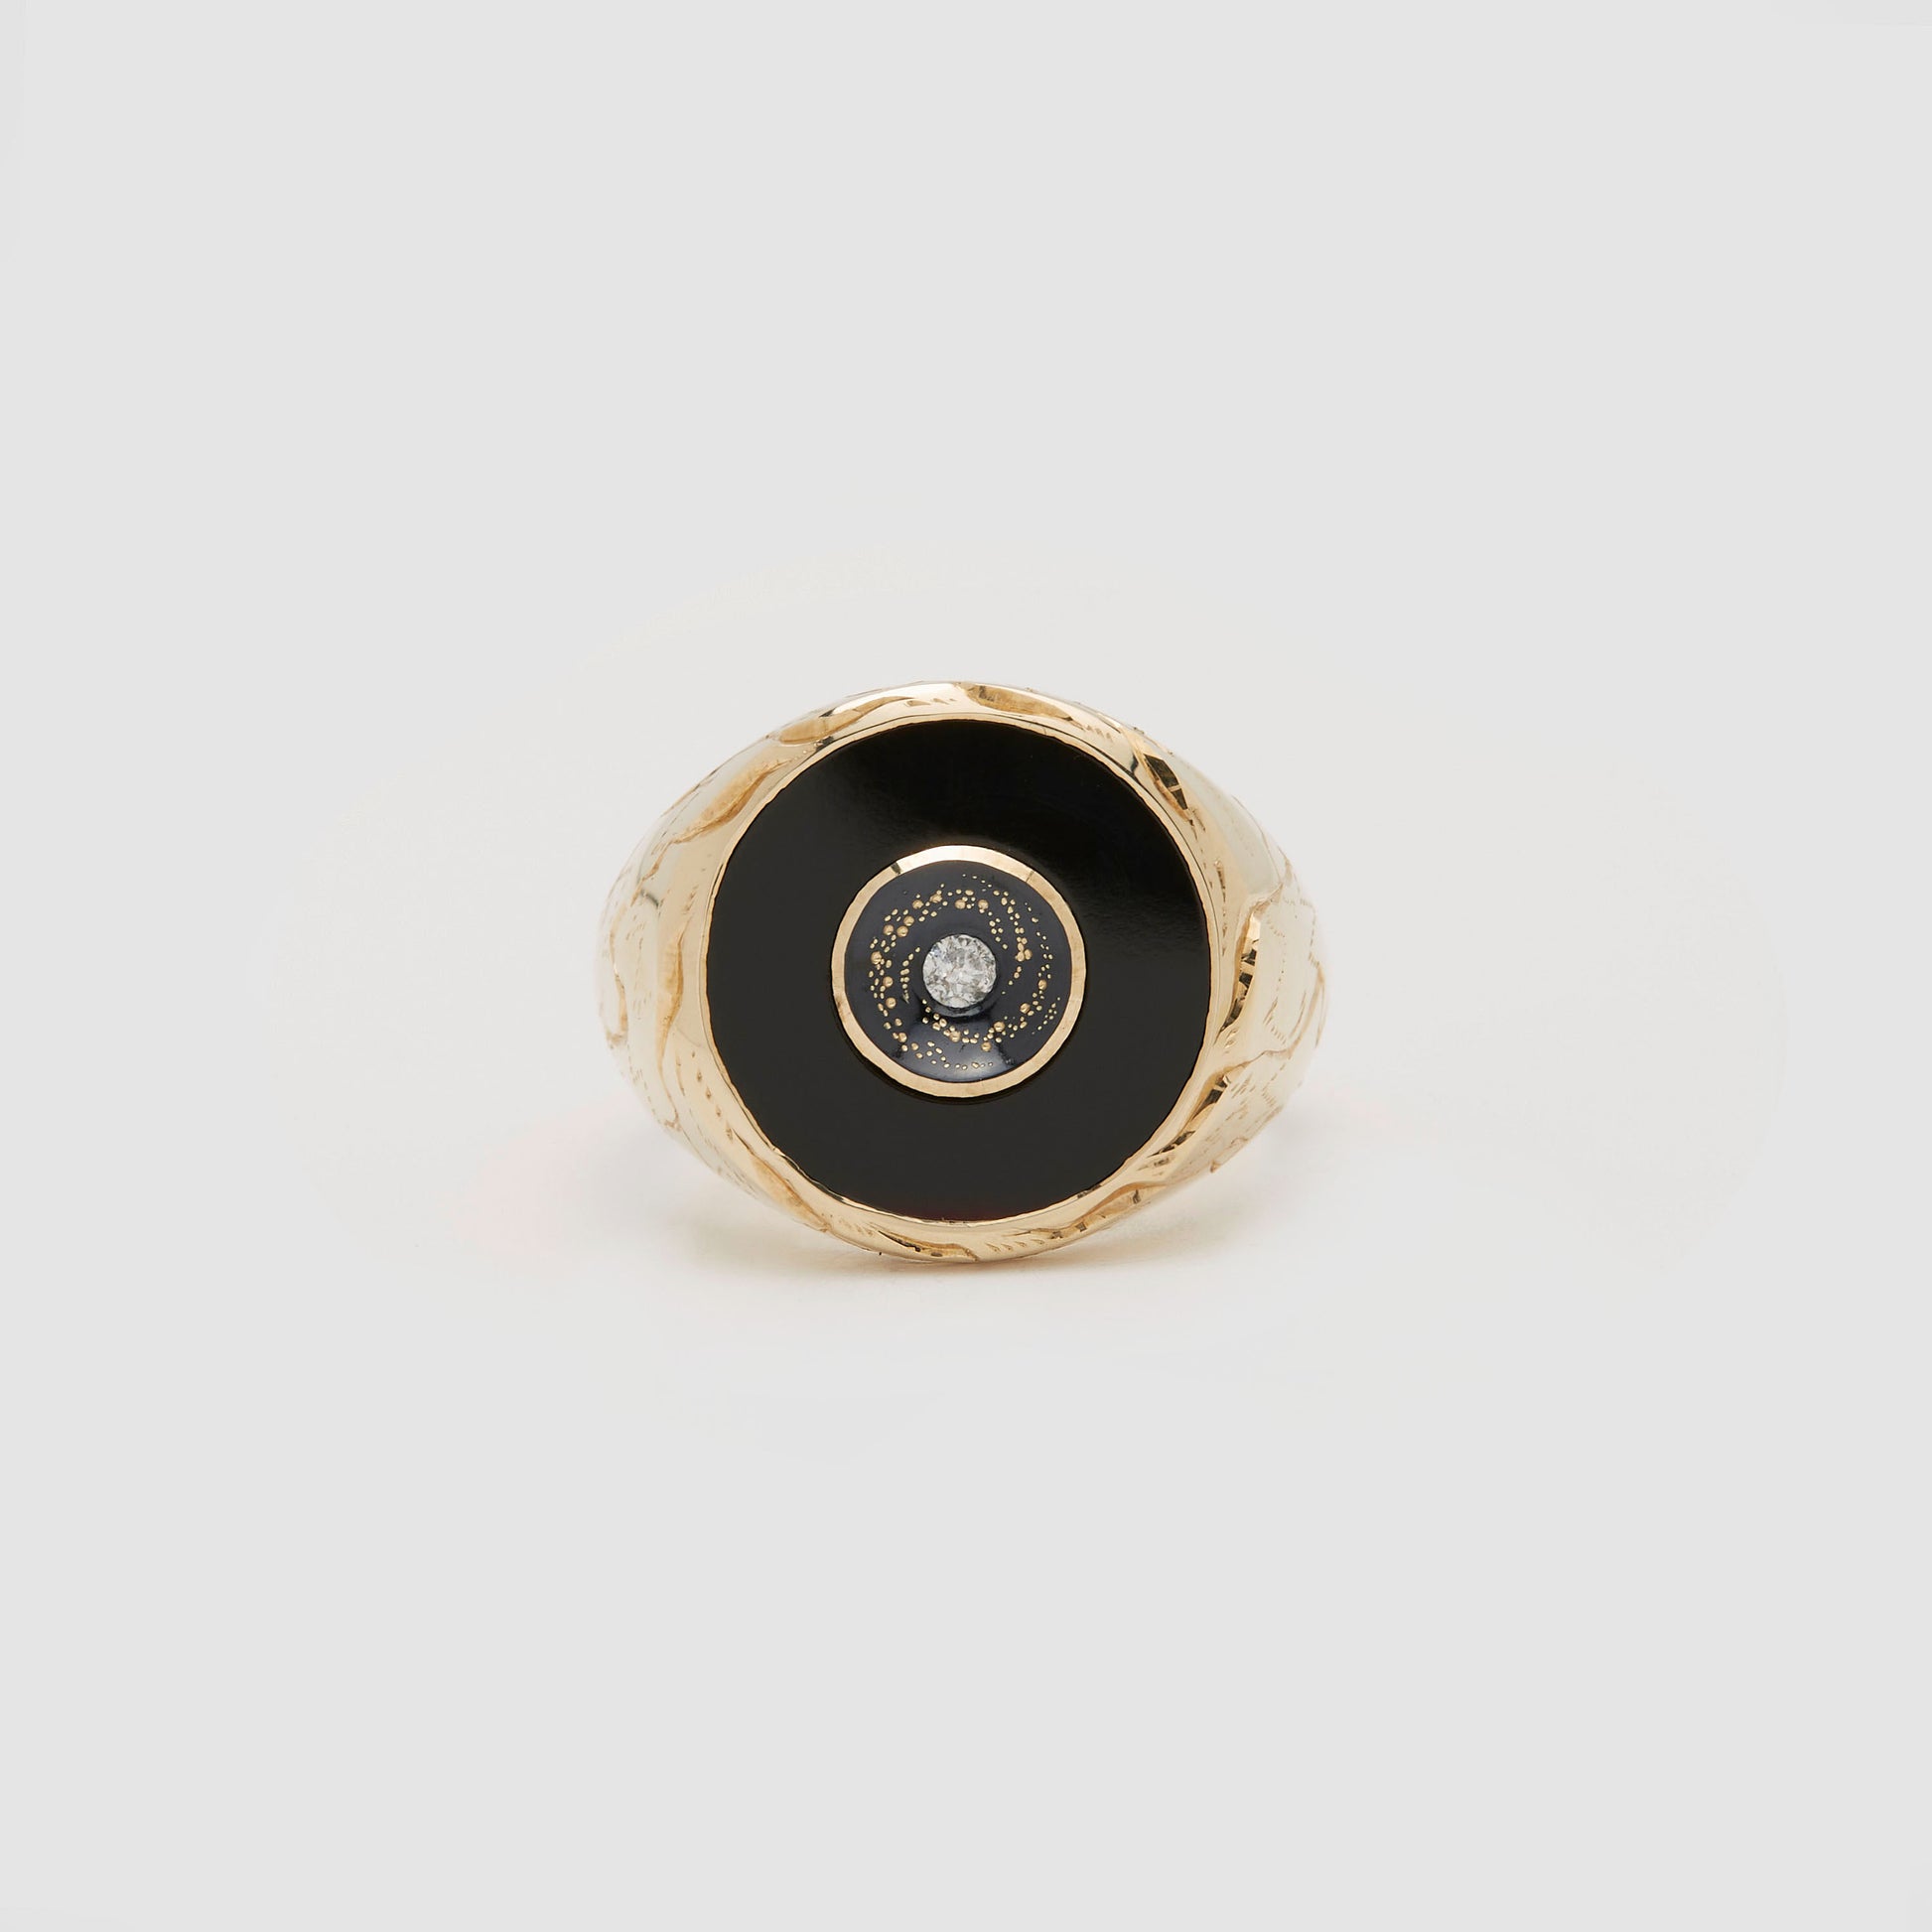 Castro Smith Jewelry Gold Oubliette Signet Ring with Onyx Around a Concave Galaxy with a Centre Diamond in Profile View.